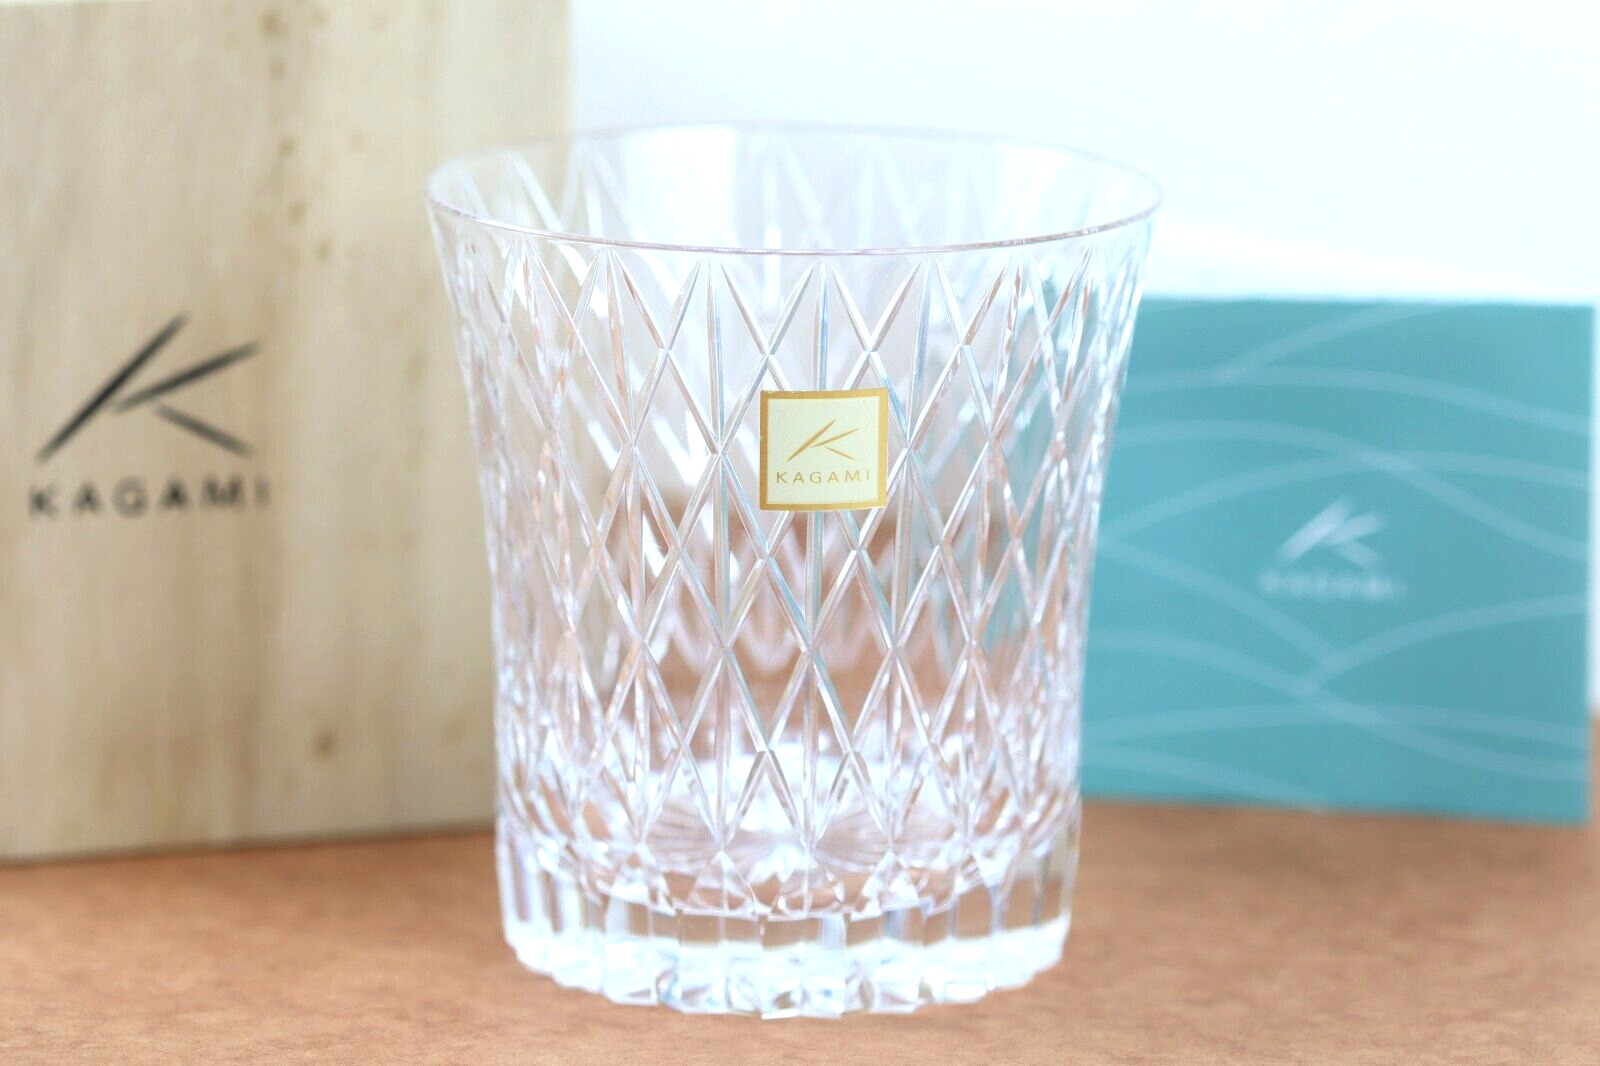 Kagami Crystal Rock Glass Clear 250ml T742-2809 w/Wooden Gift Box Made in Japan